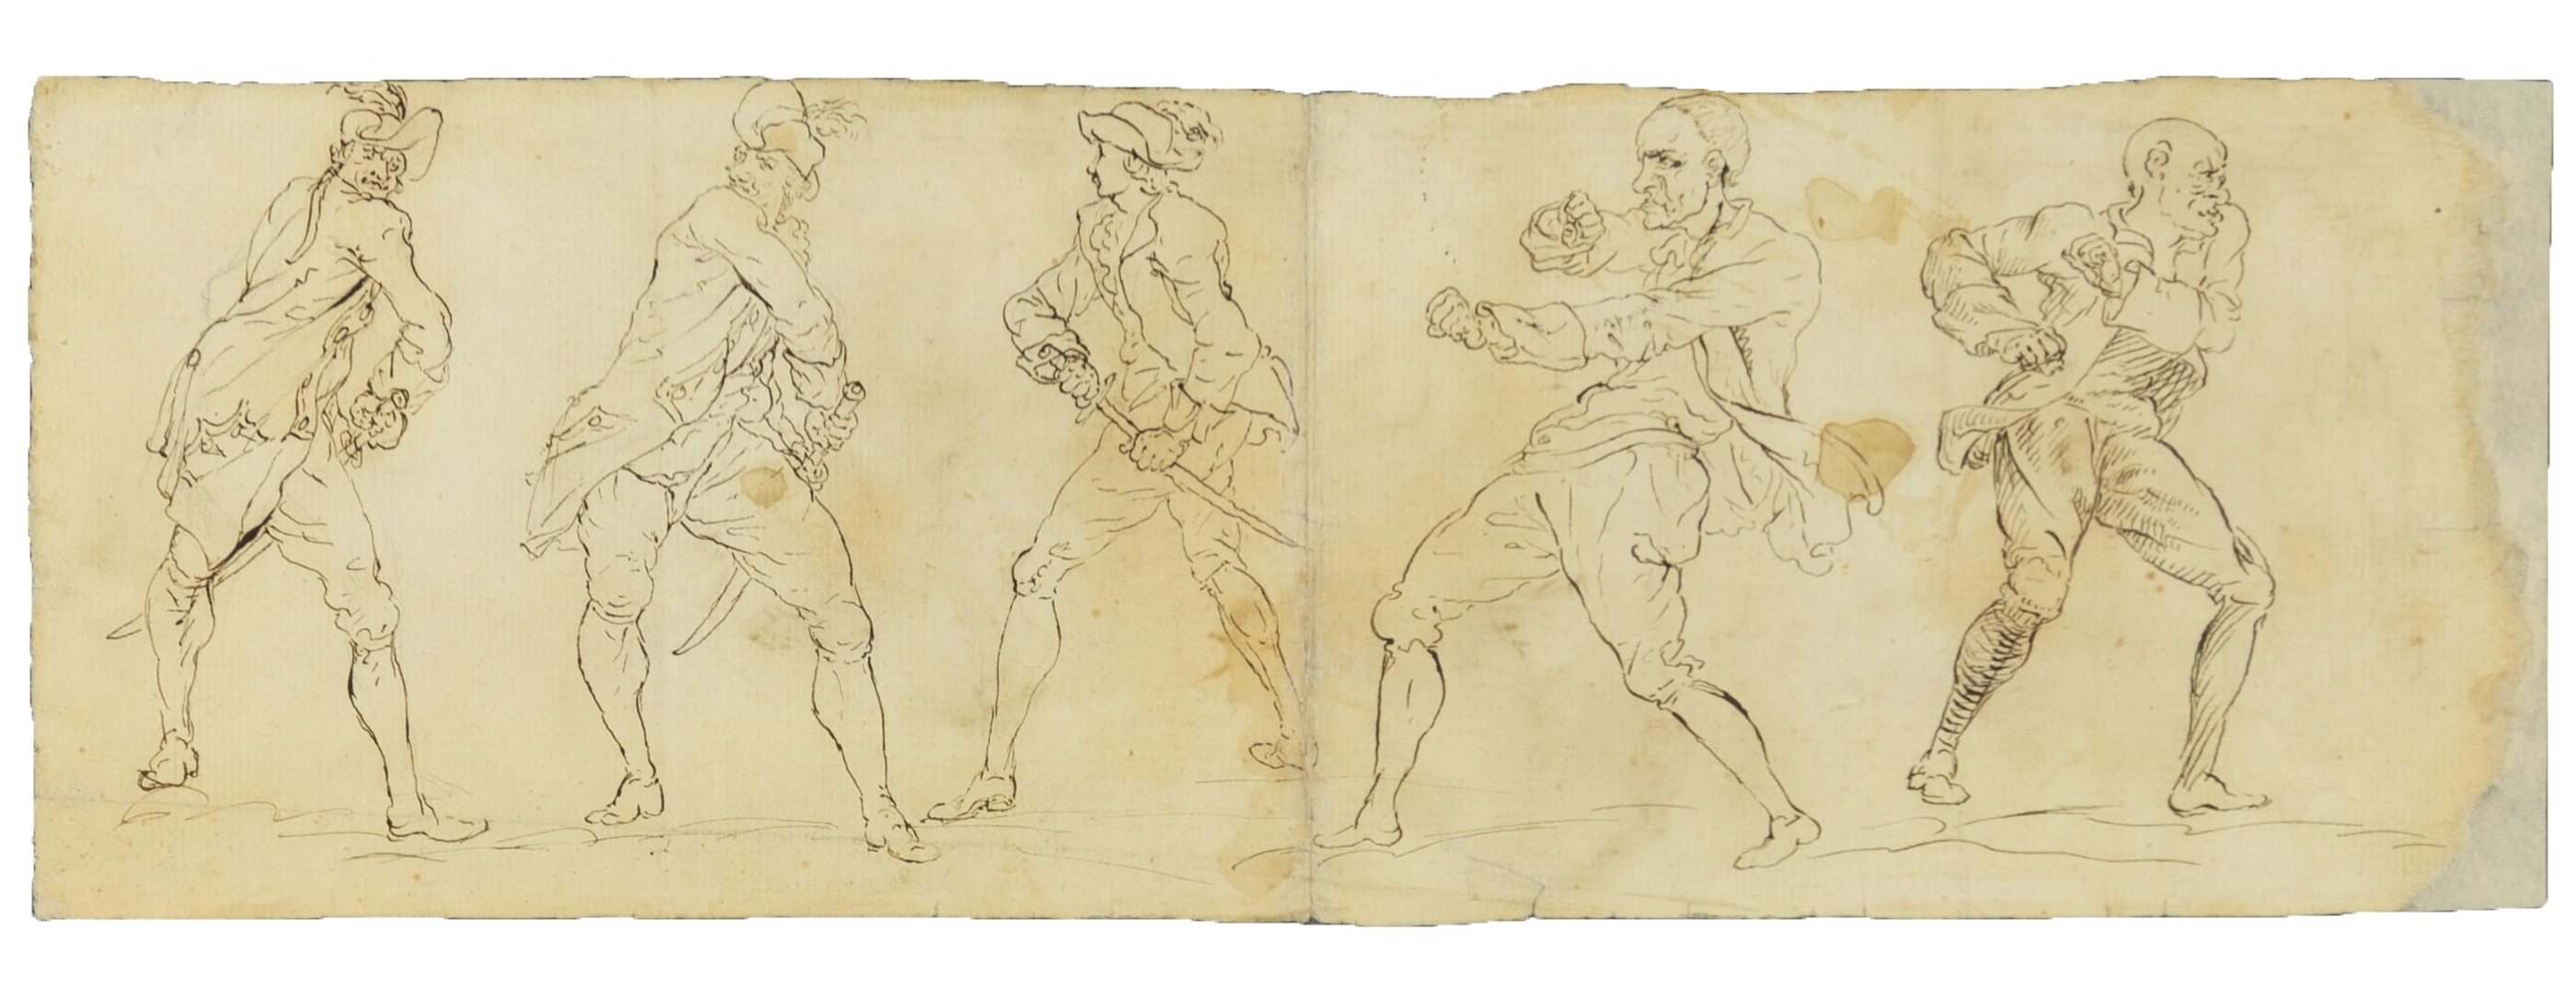 sketch in n.y. apartment turns out to be rare revolutionary war drawing